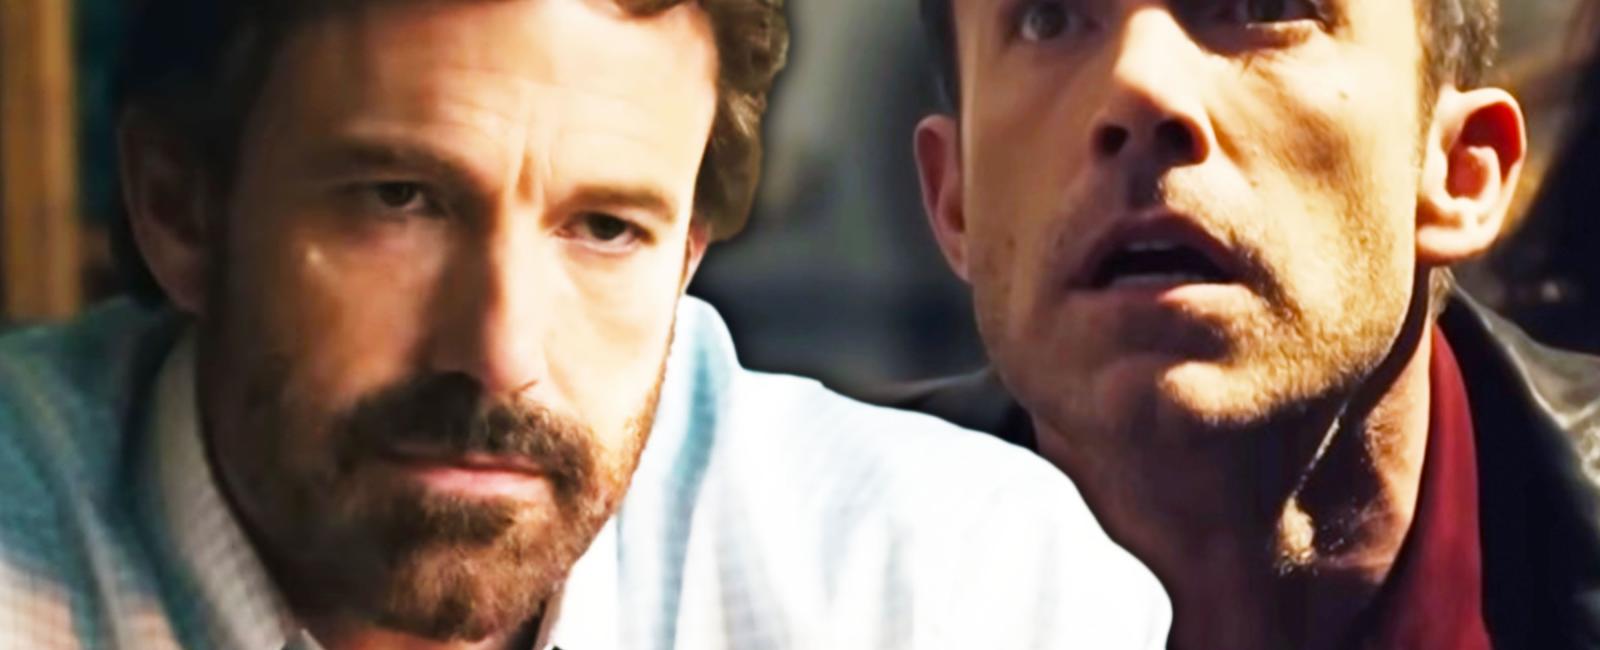 Oh No, Ben Affleck’s New Movie Could Make Him 2023’s First Star With 2 Big Flops